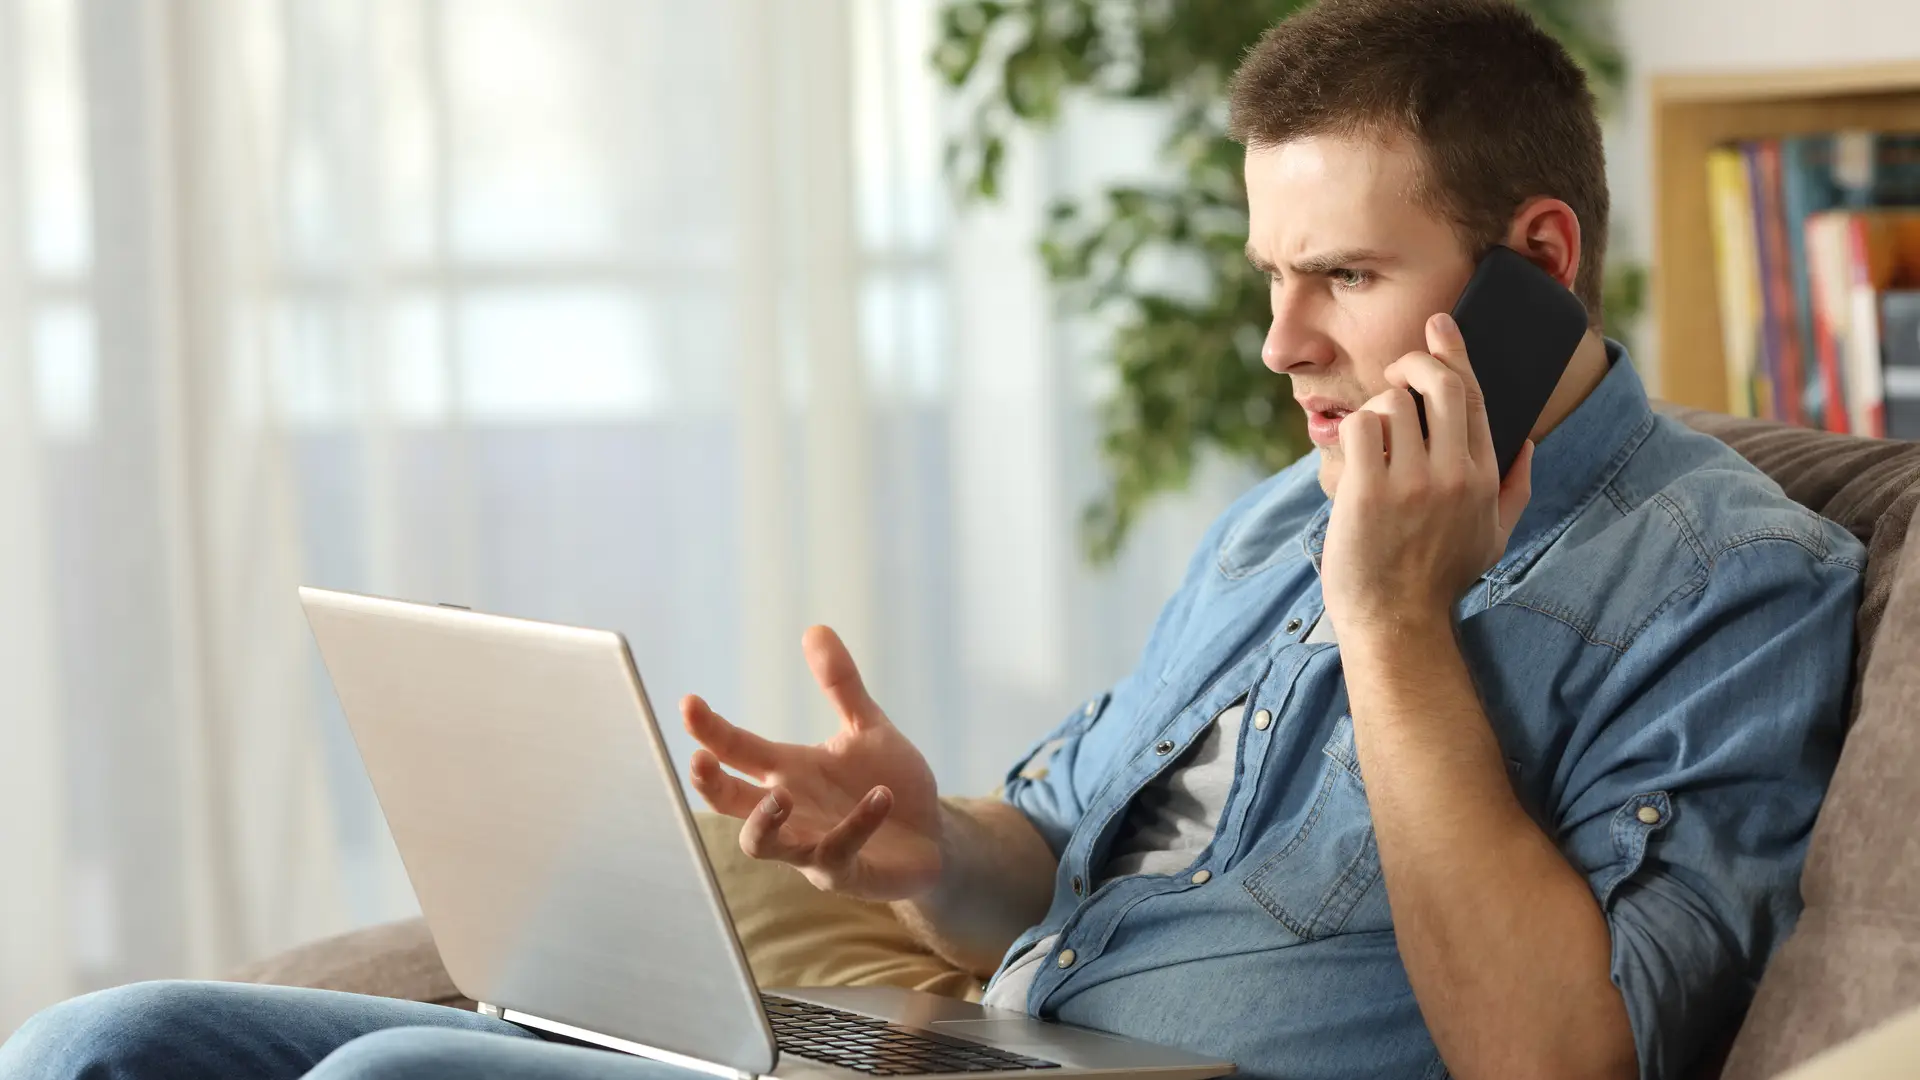 Is Plusnet down? What to do if you have issues with your broadband or mobile